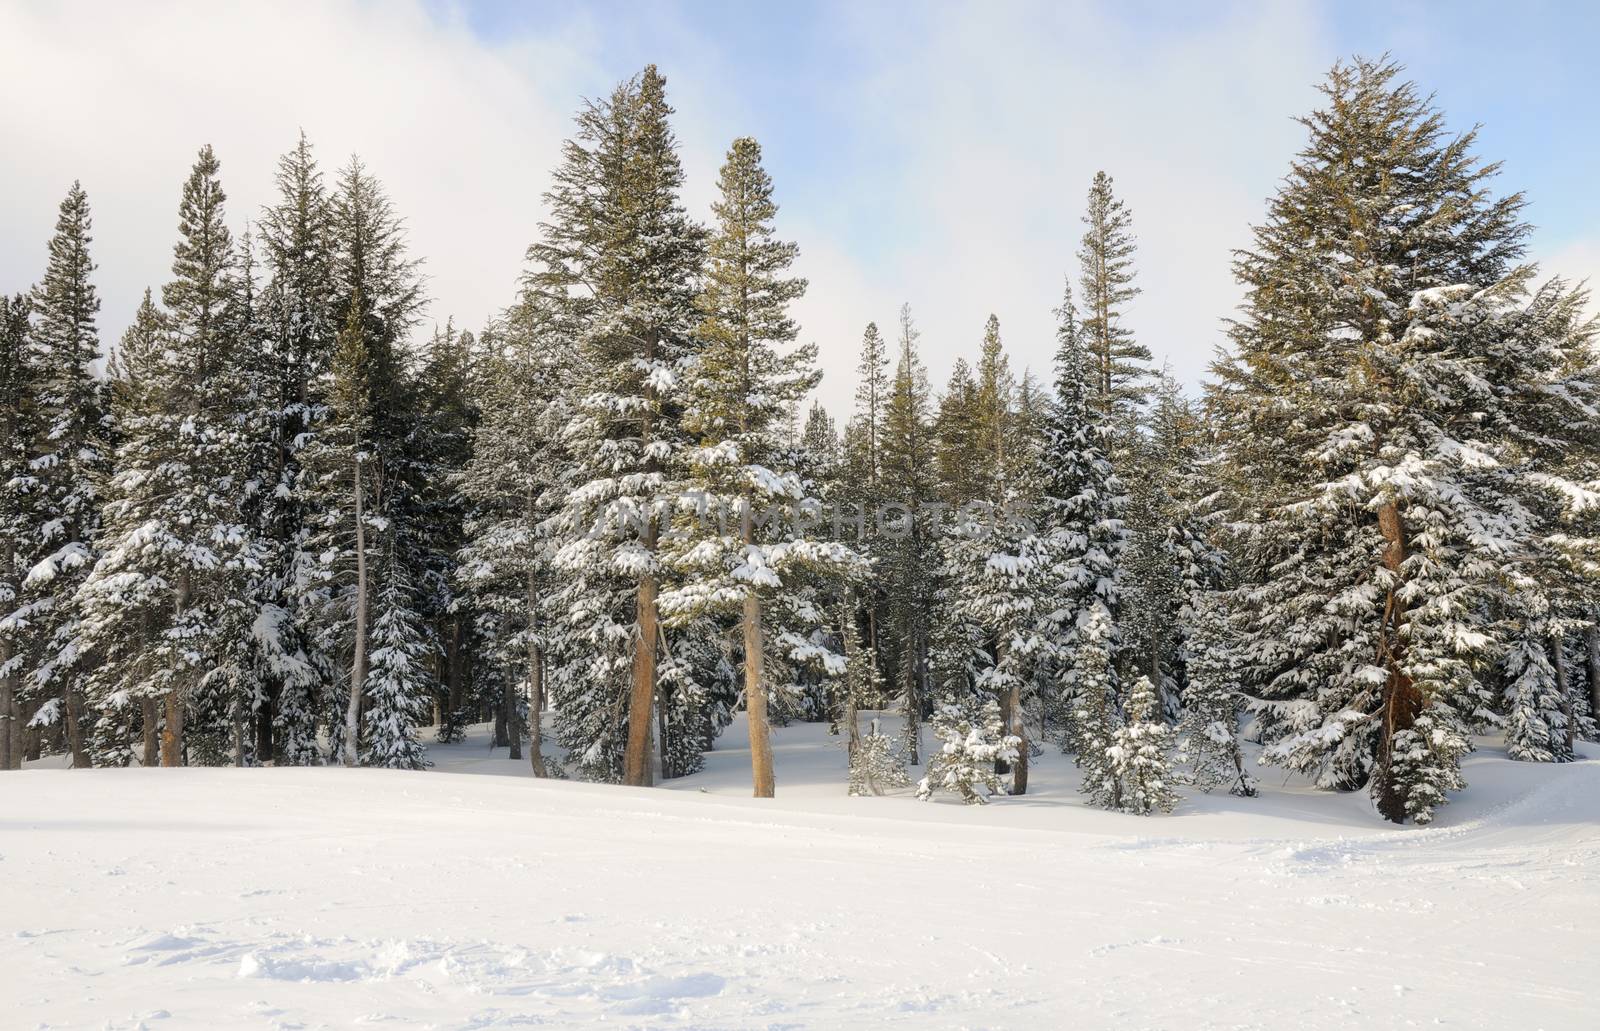 Winter Trees on Mammoth Mountain, CA. by Njean